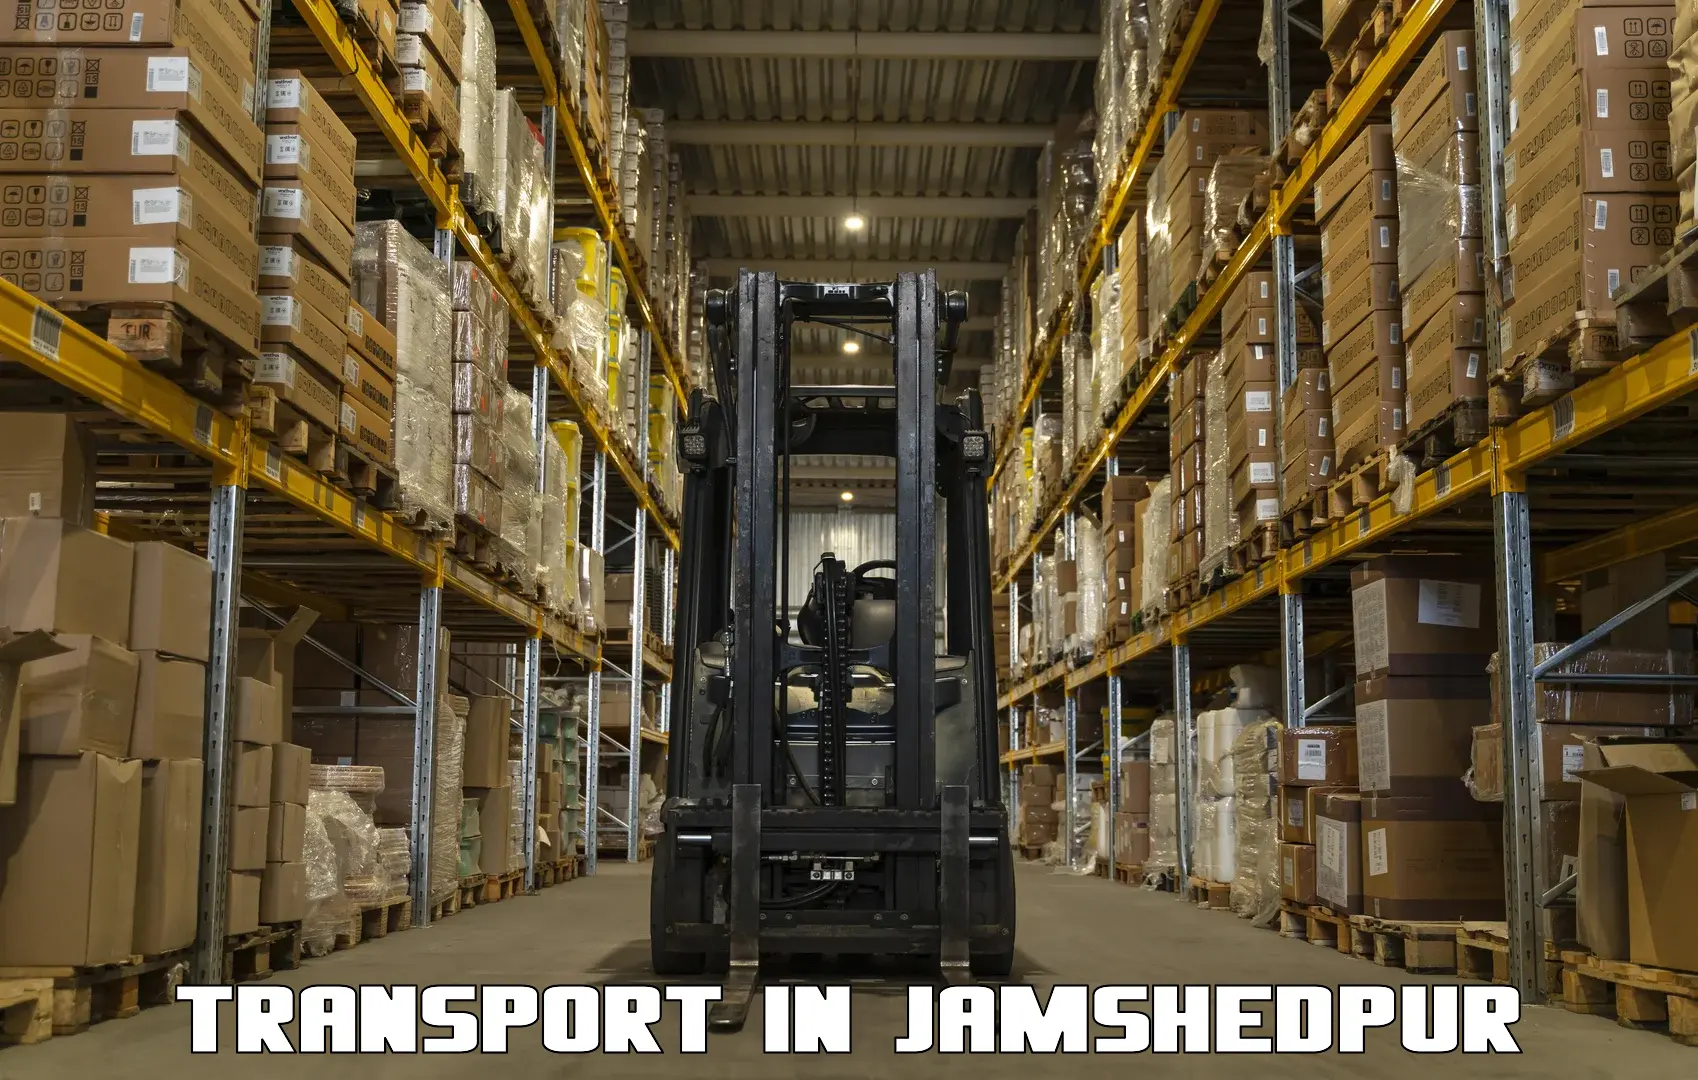 Daily transport service in Jamshedpur